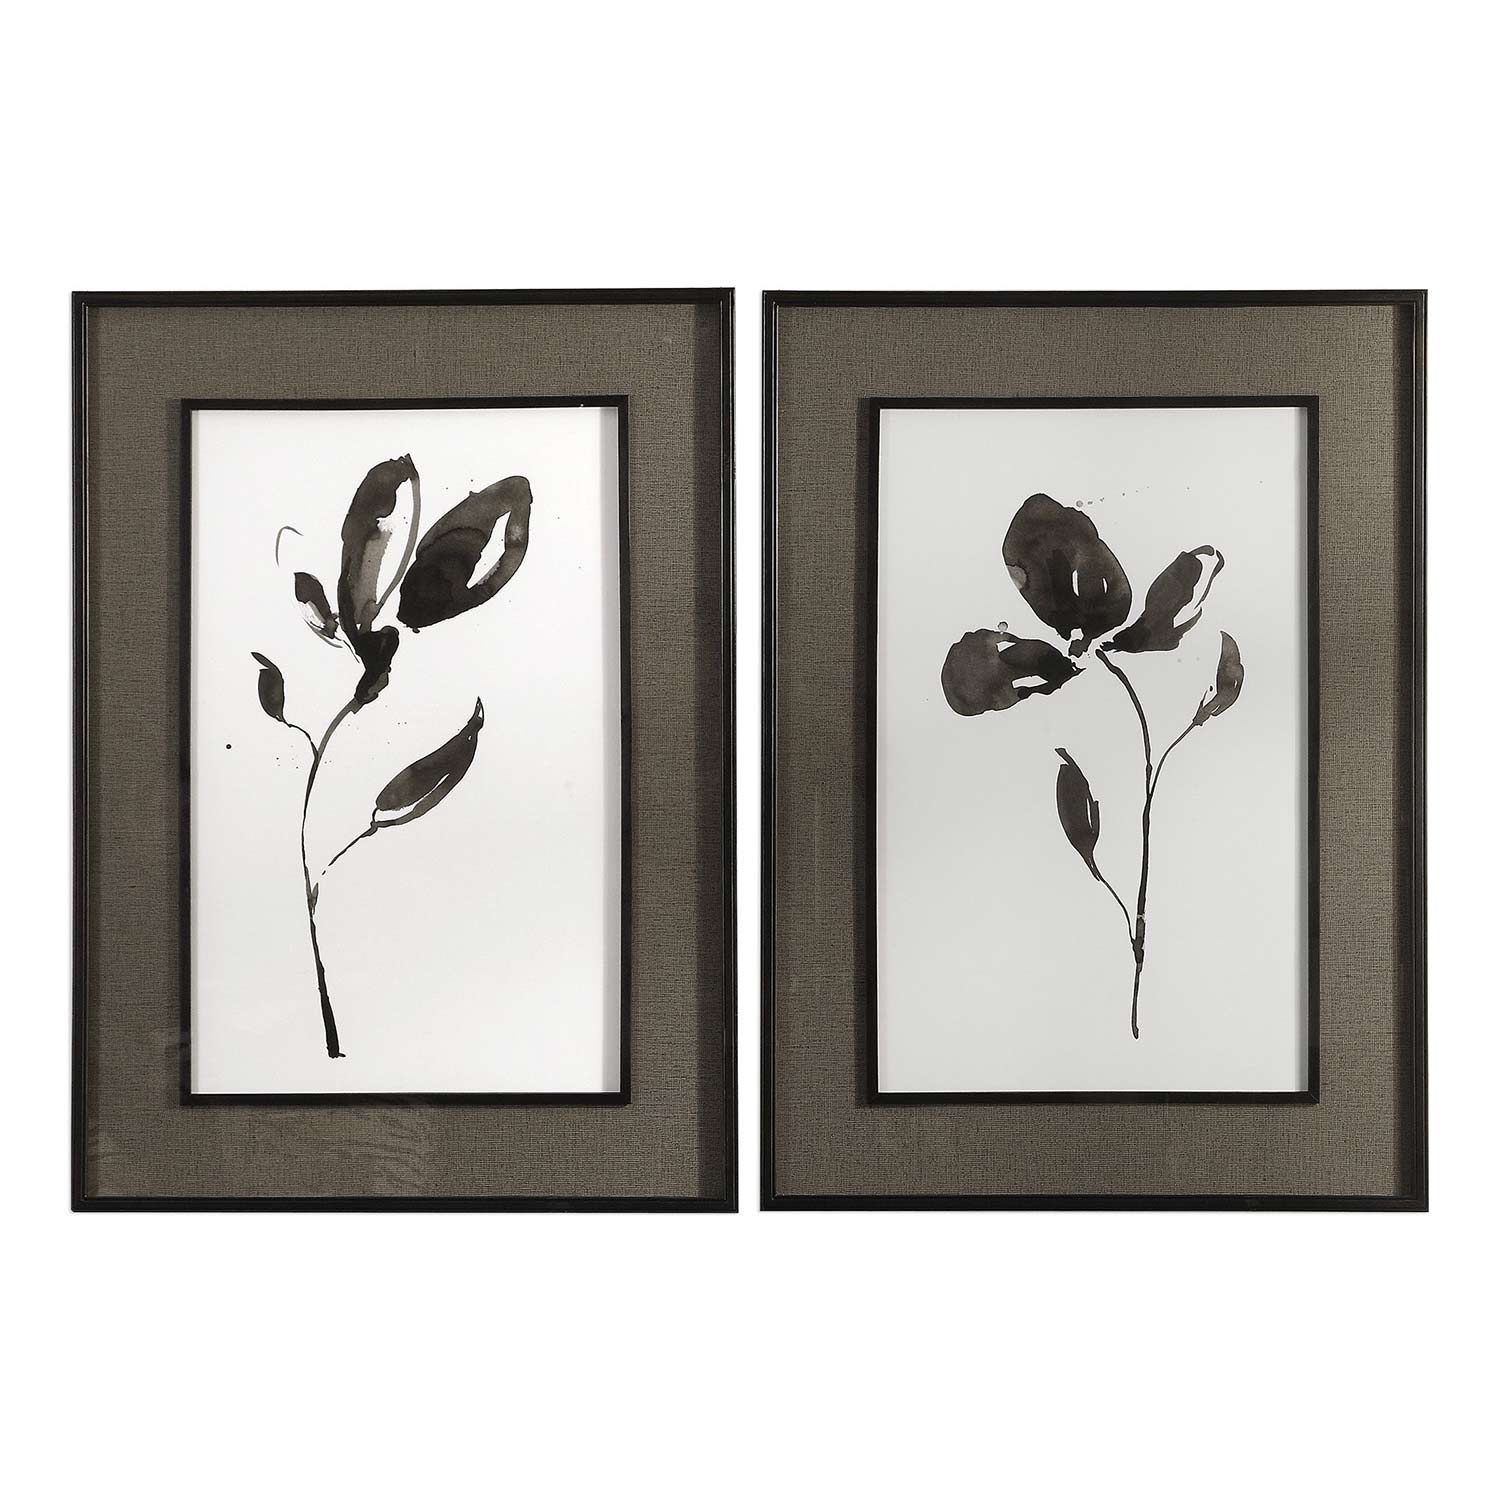 Uttermost Solitary Sumi-e Floral Prints - Set of 2